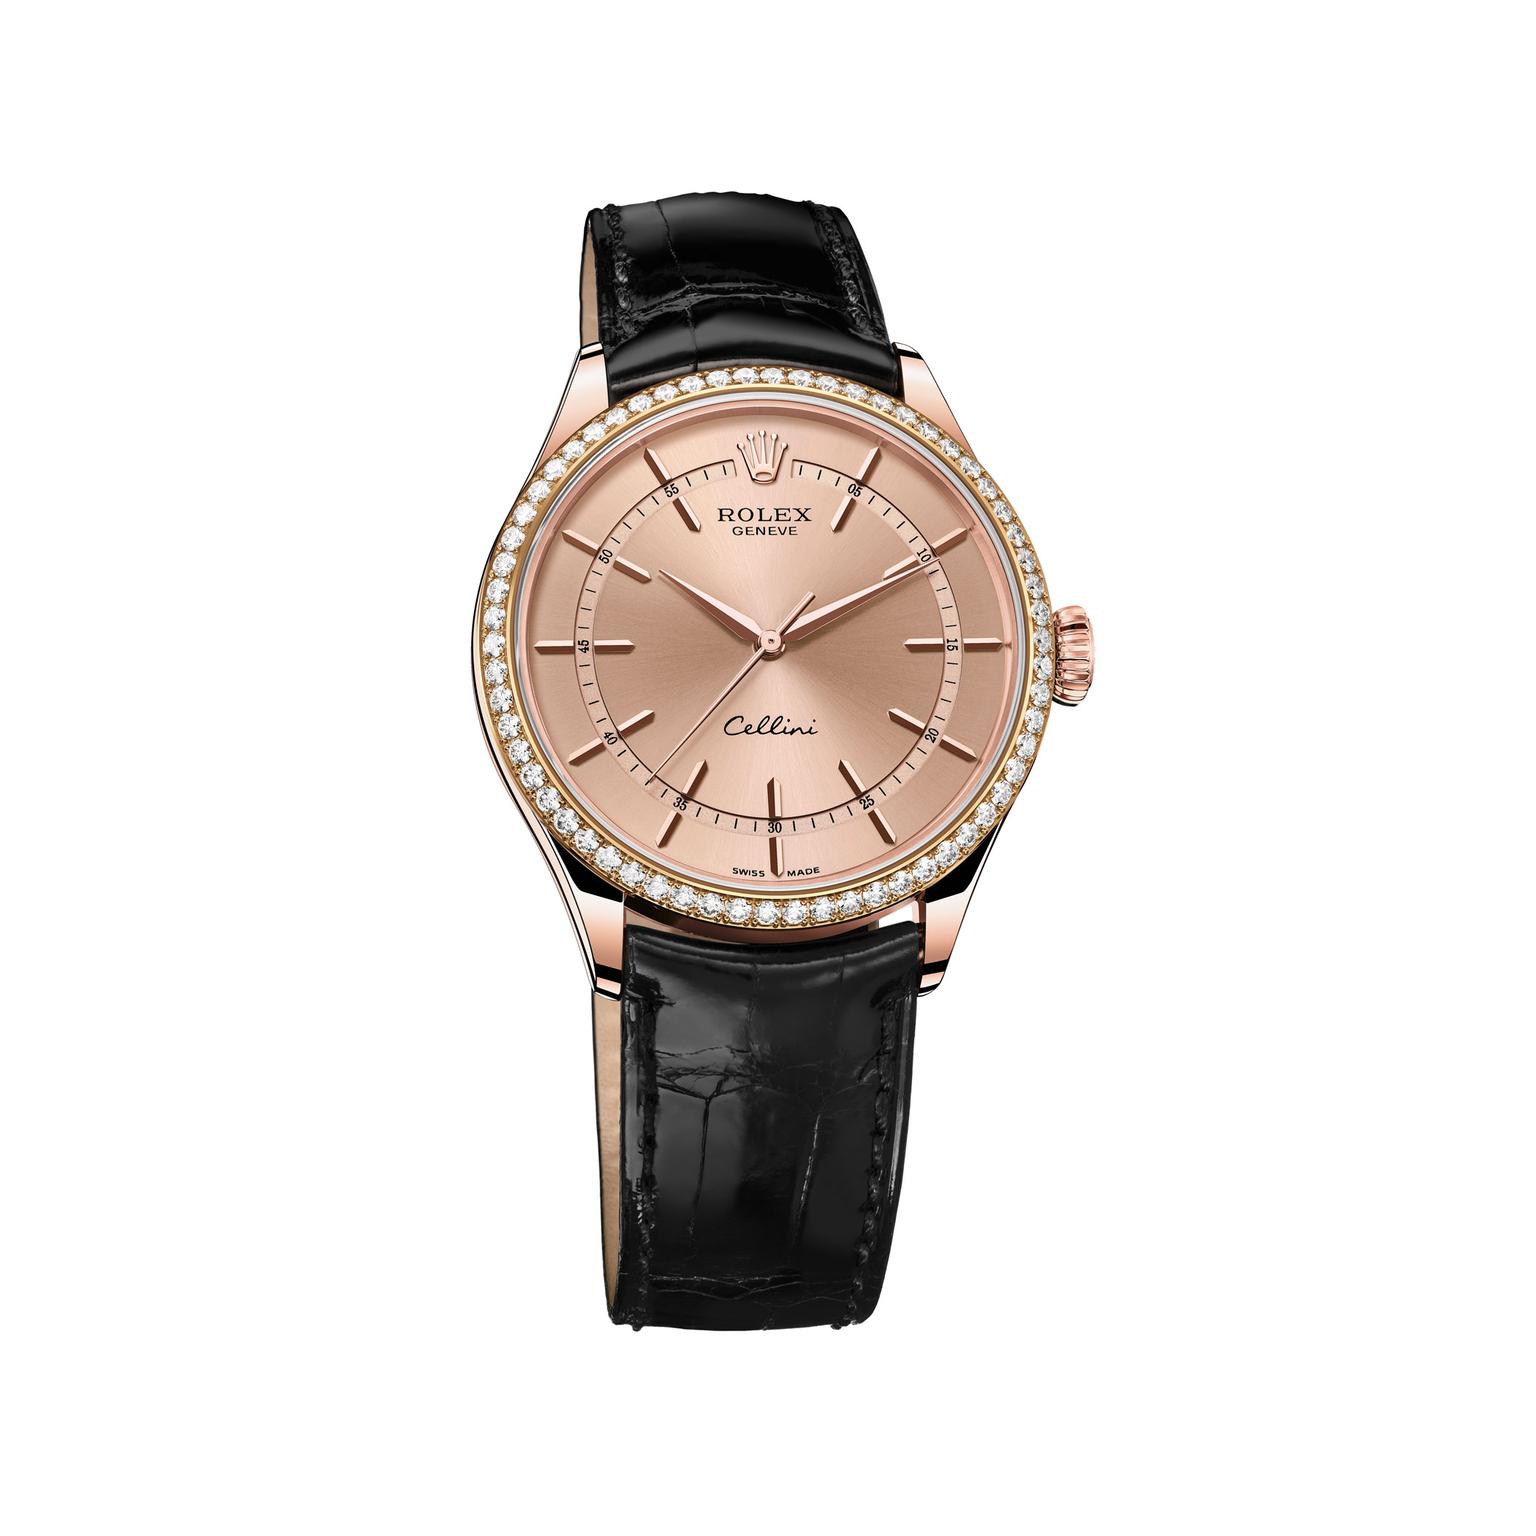 Rolex Cellini Rose Gold and diamond watch_zoom